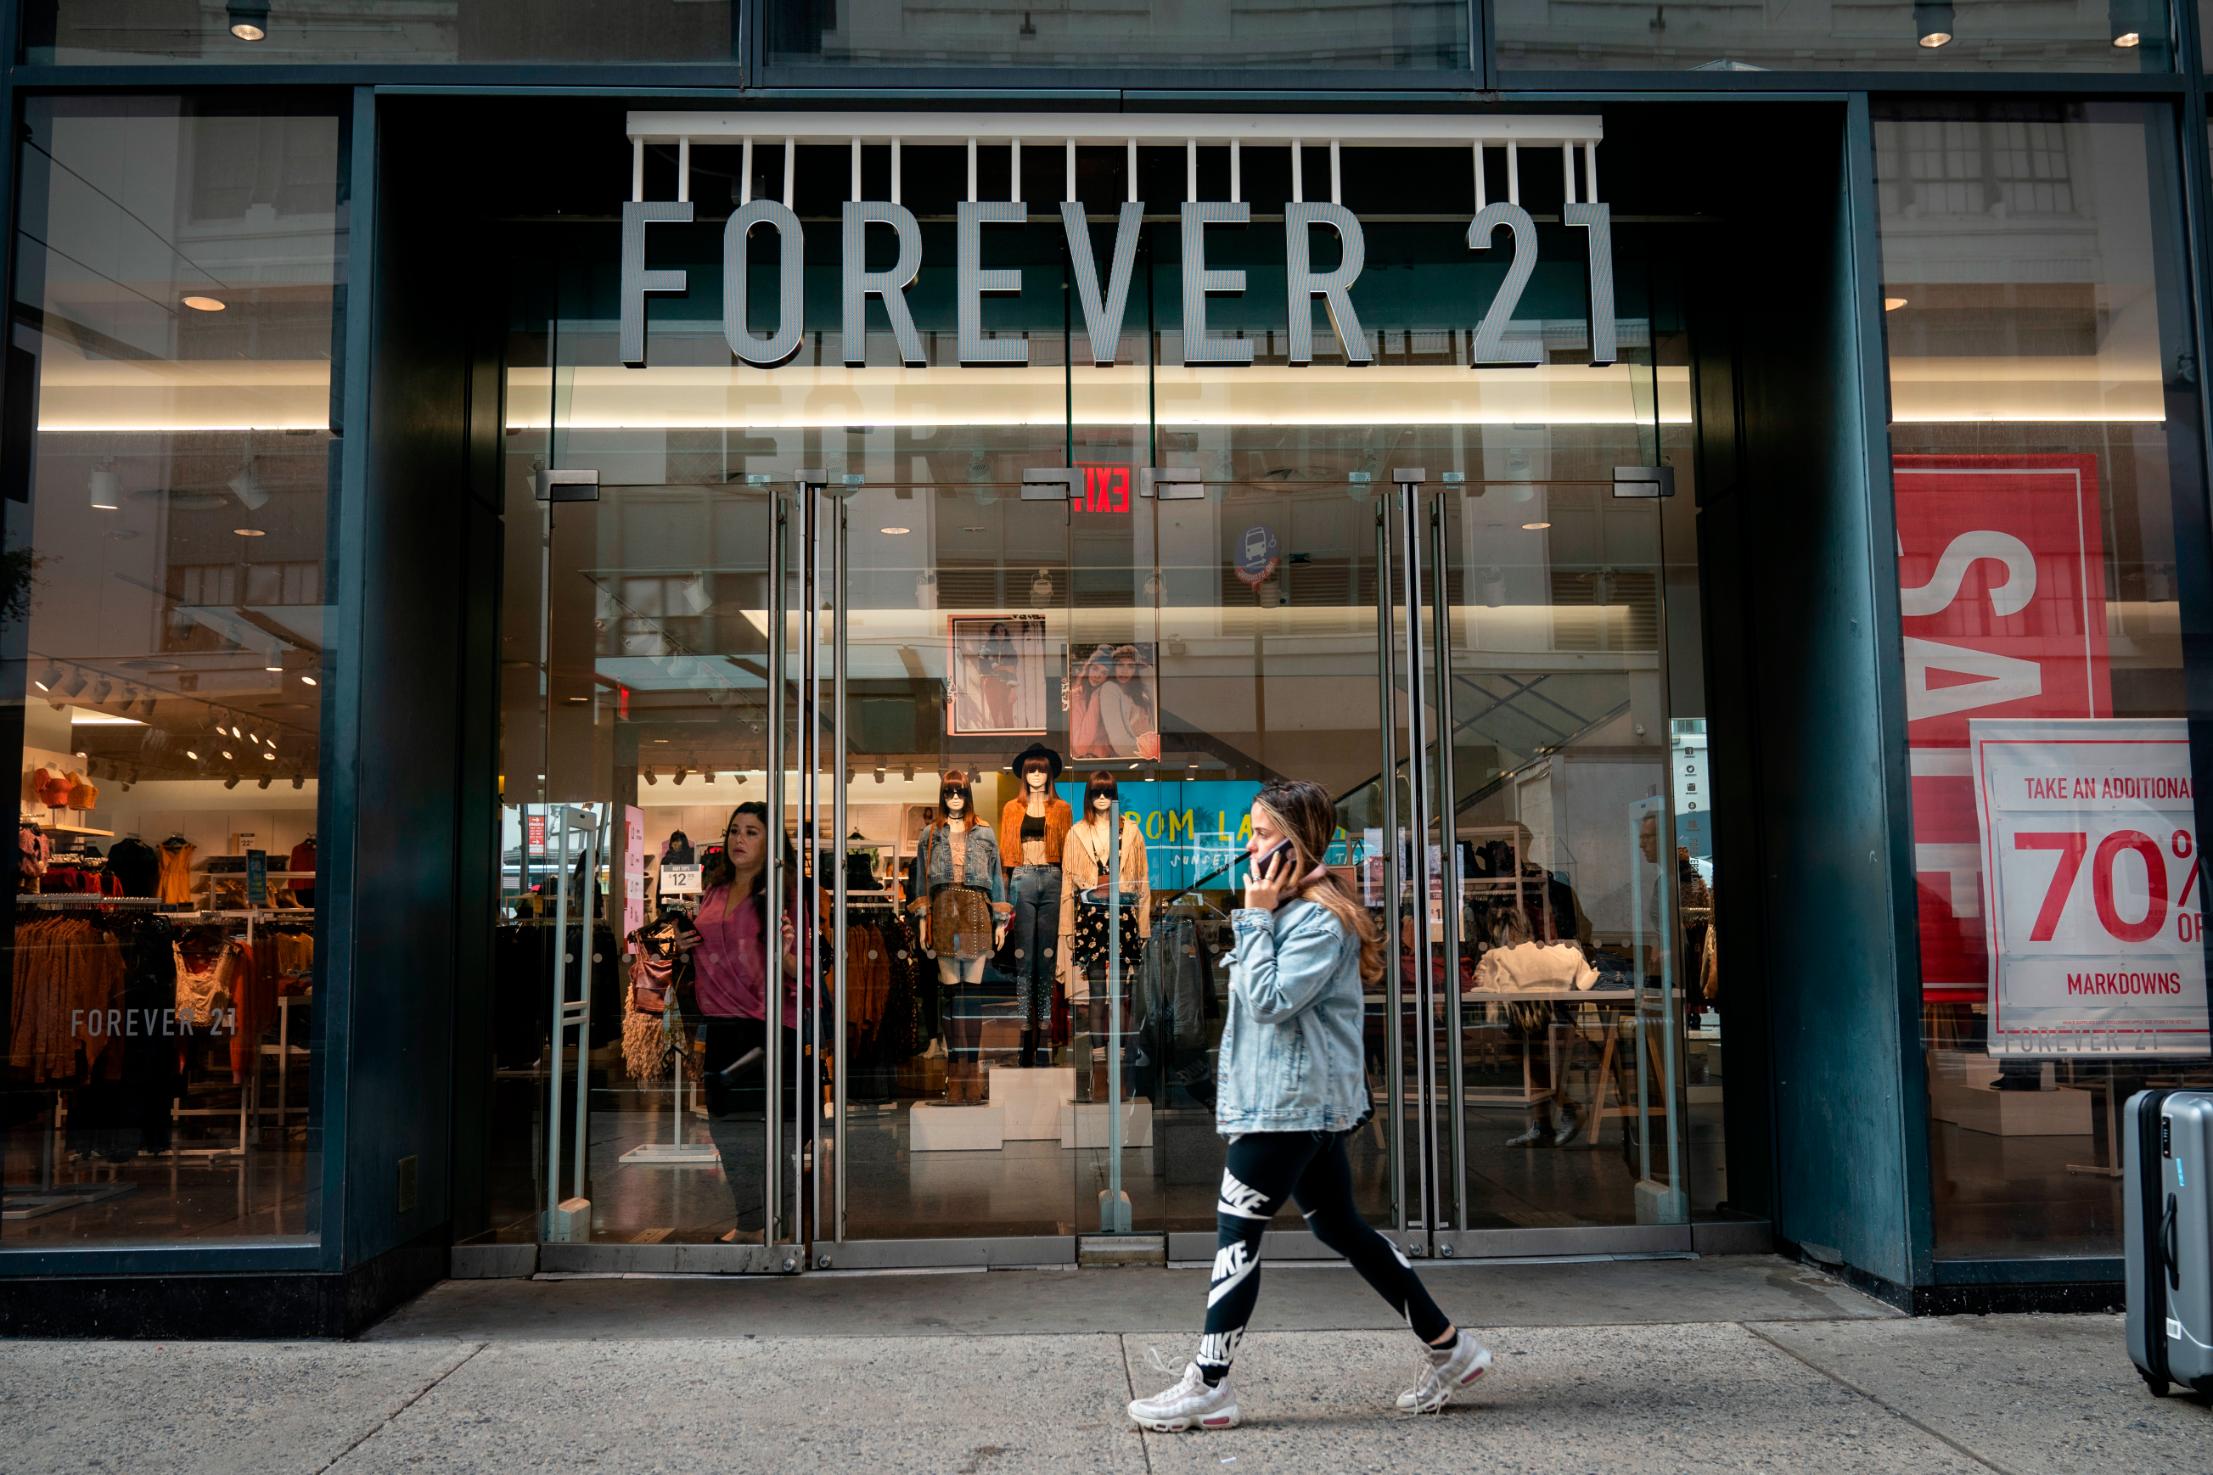 Forever 21 Presidents Day 2023 Sales, Hours, Ads & Deals – What To Expect